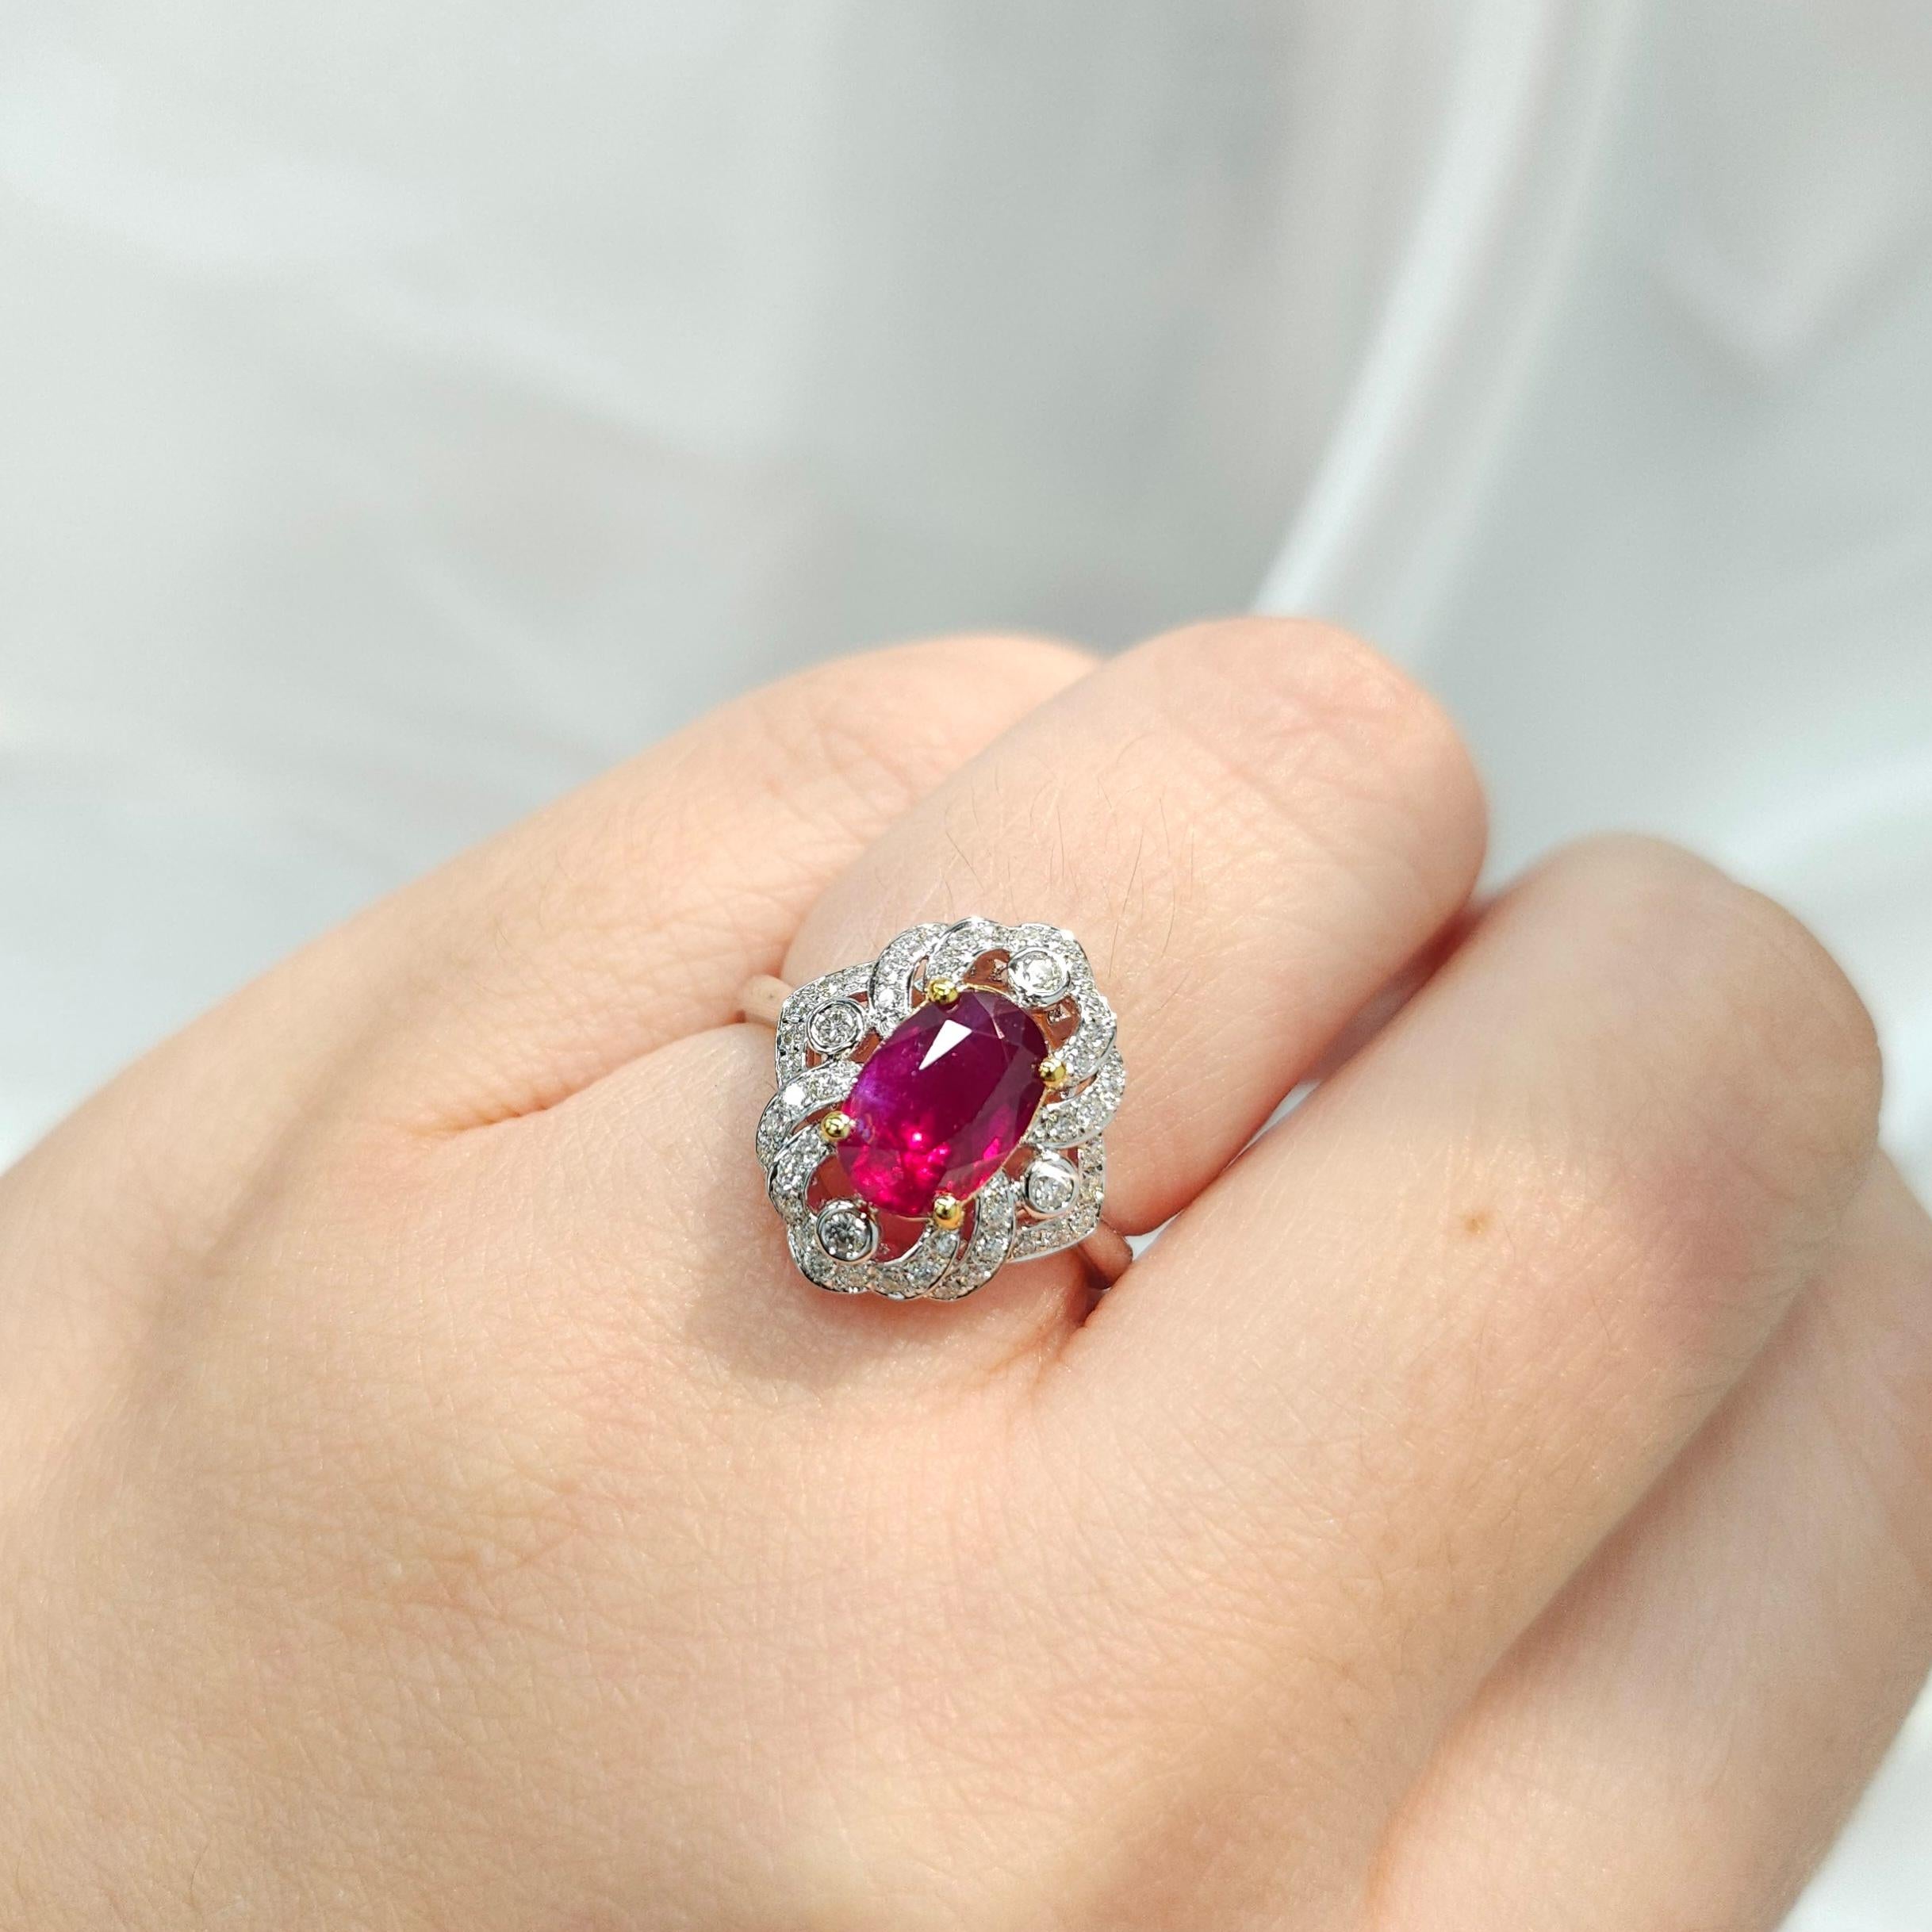 Indulge in the opulent beauty of this exquisite IGI Certified 2.07 Carat Ruby and Diamond Antique Style Ring, a piece that exudes elegance and sophistication in every detail. The centerpiece of this magnificent ring is a rare and alluring 2.07 carat